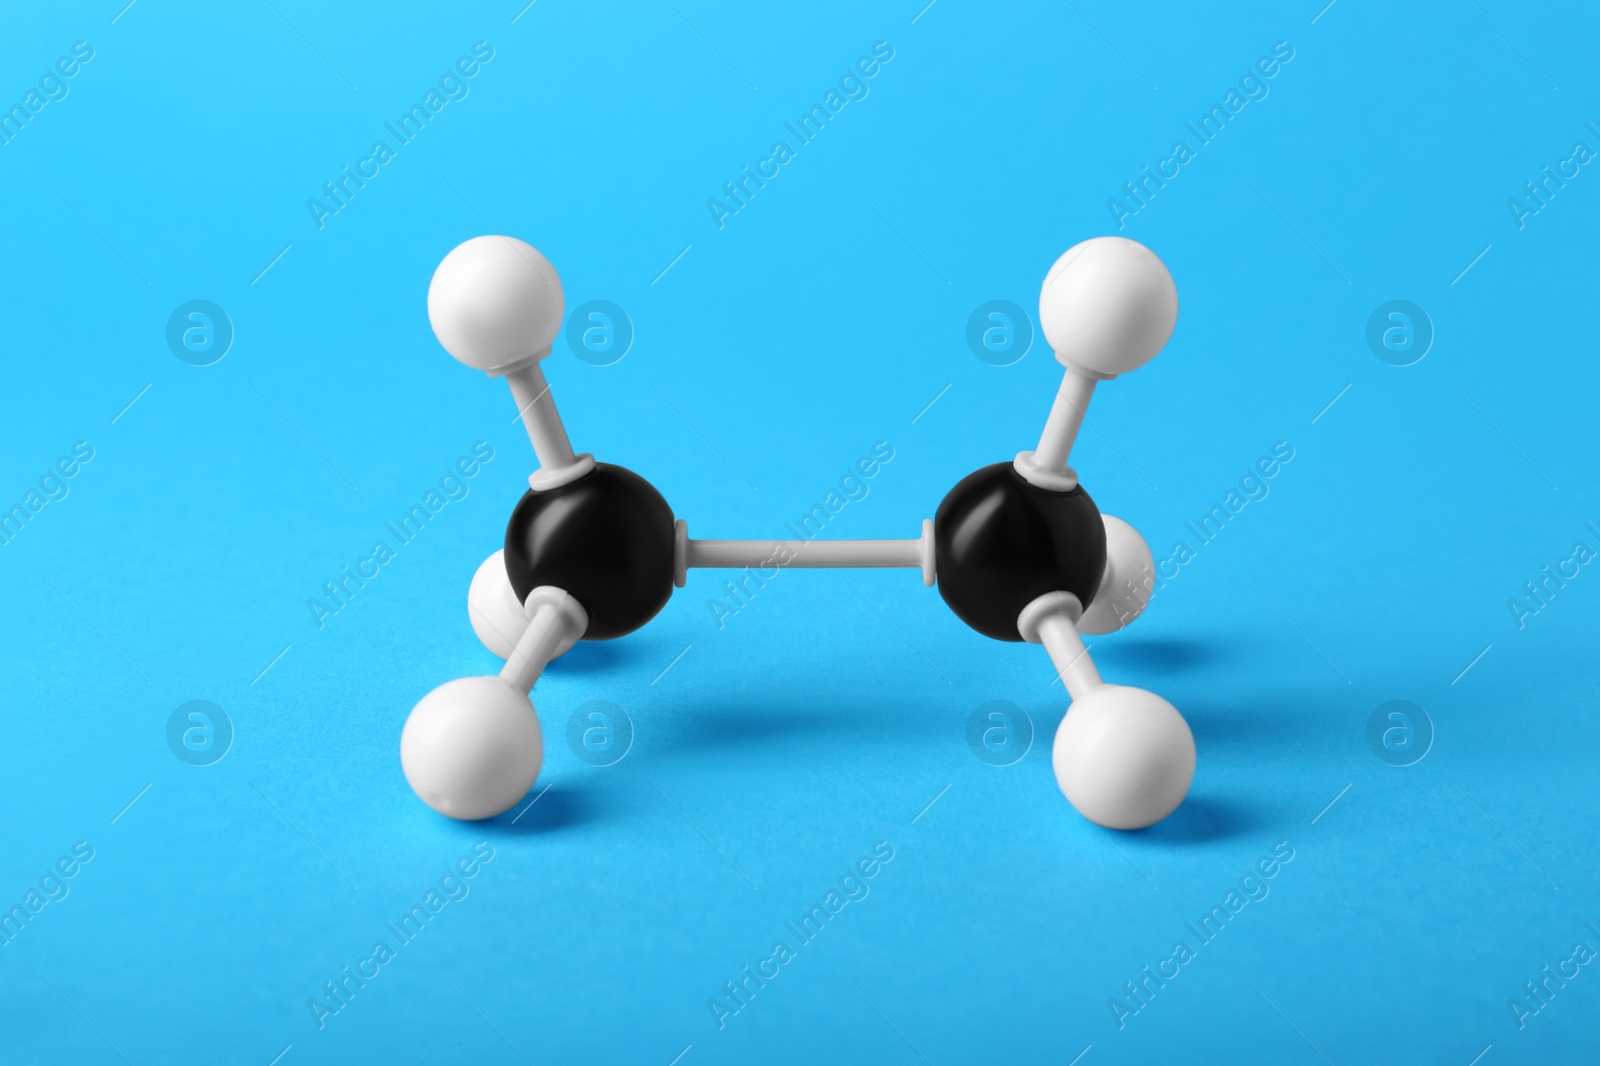 Photo of Molecule of alcohol on light blue background. Chemical model